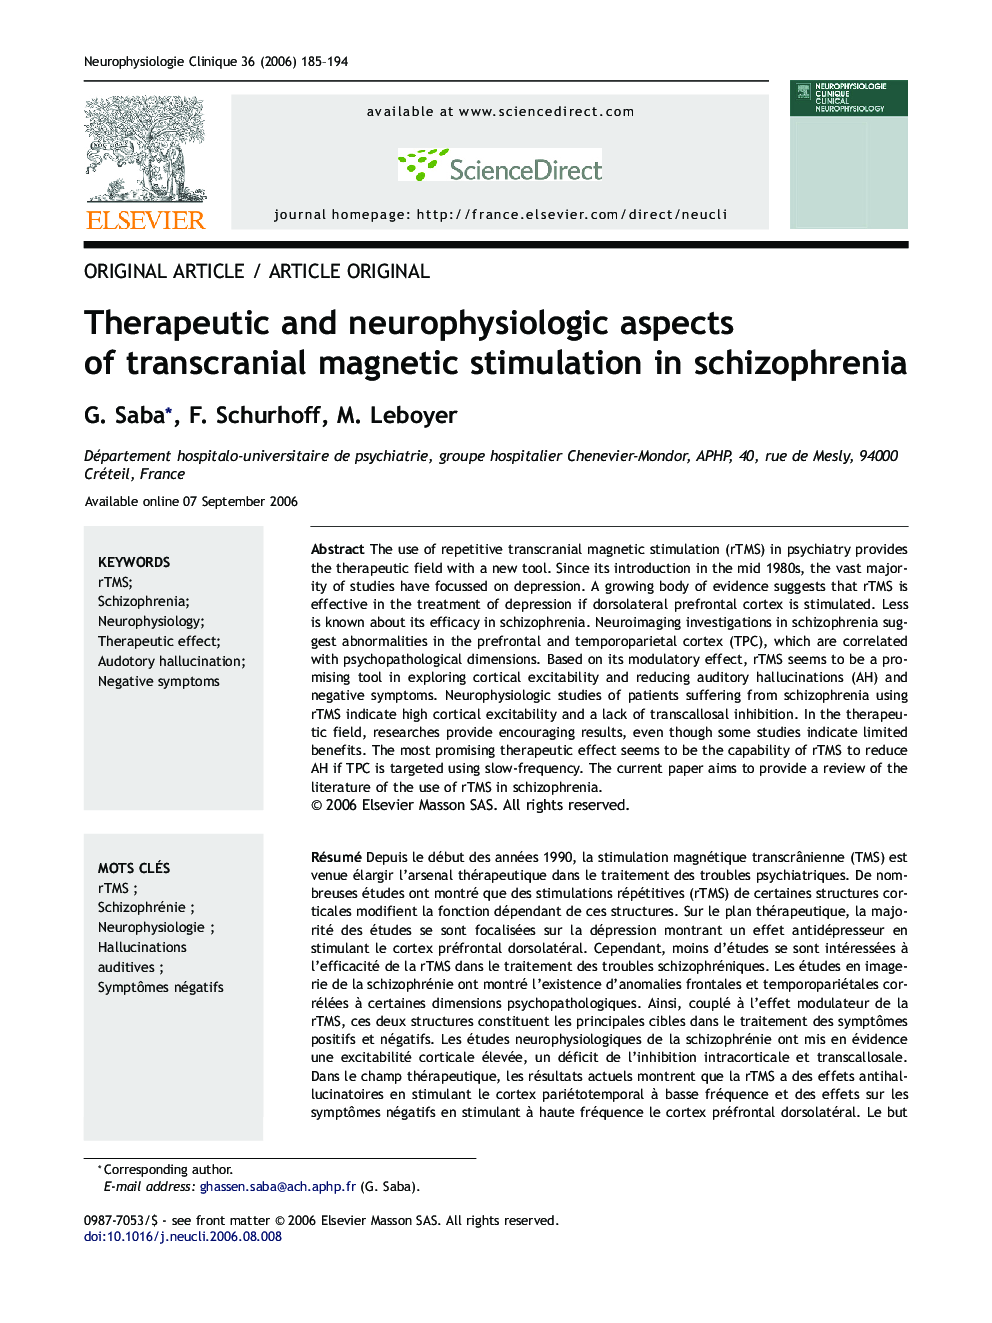 Therapeutic and neurophysiologic aspects of transcranial magnetic stimulation in schizophrenia